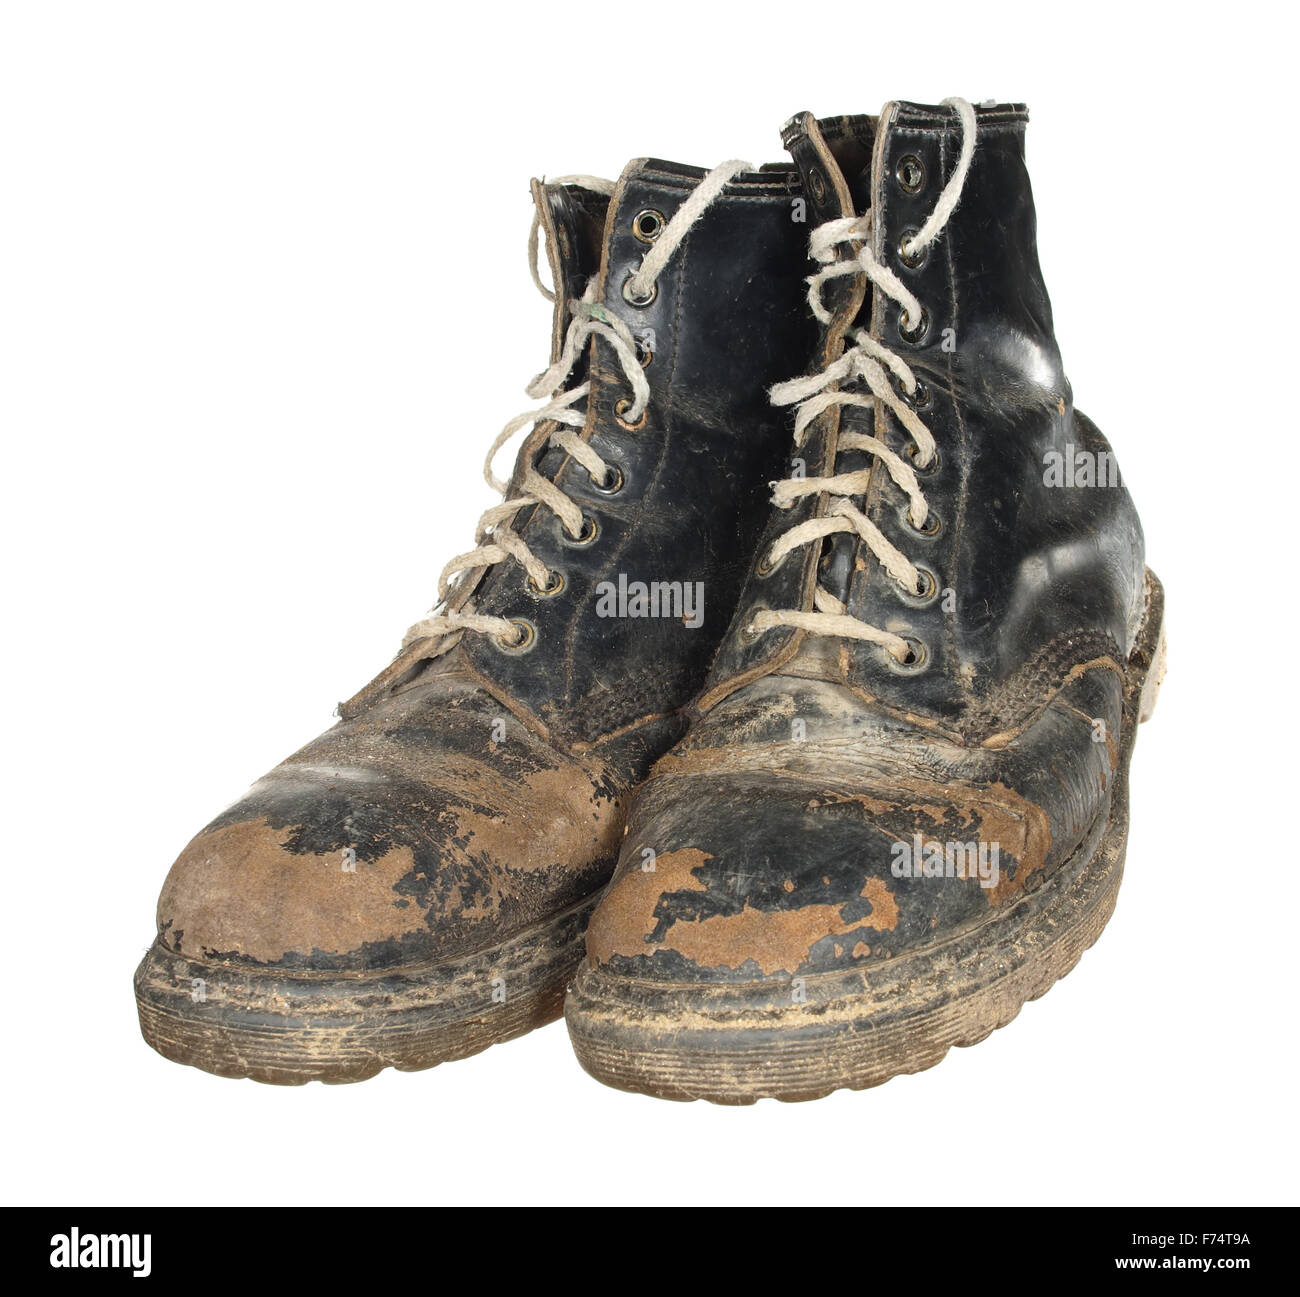 Worn Out Boots High Resolution Stock Photography and Images - Alamy